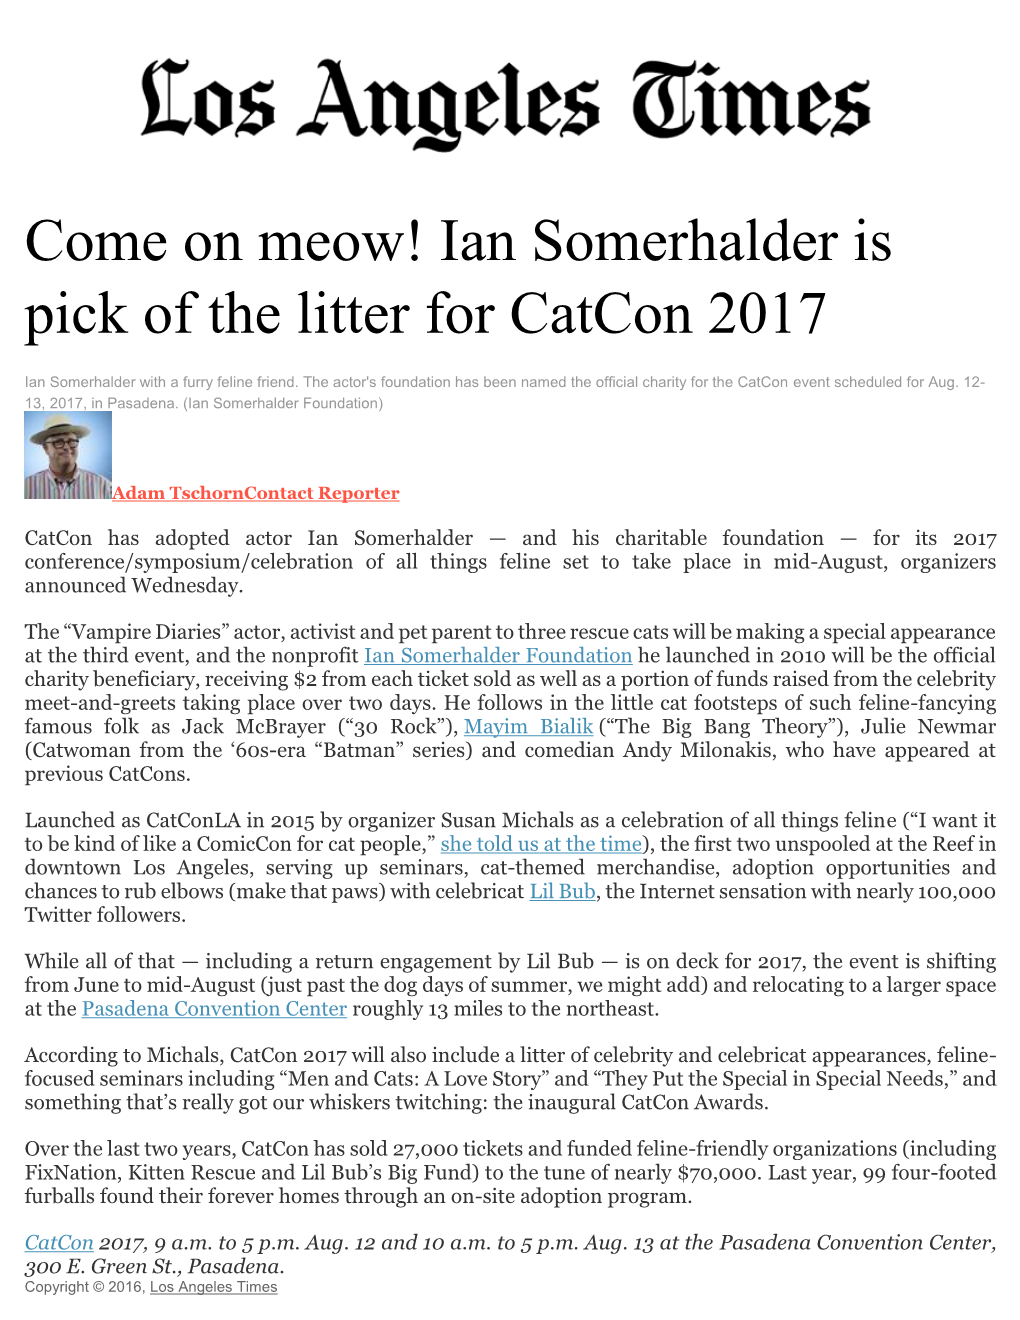 Come on Meow! Ian Somerhalder Is Pick of the Litter for Catcon 2017